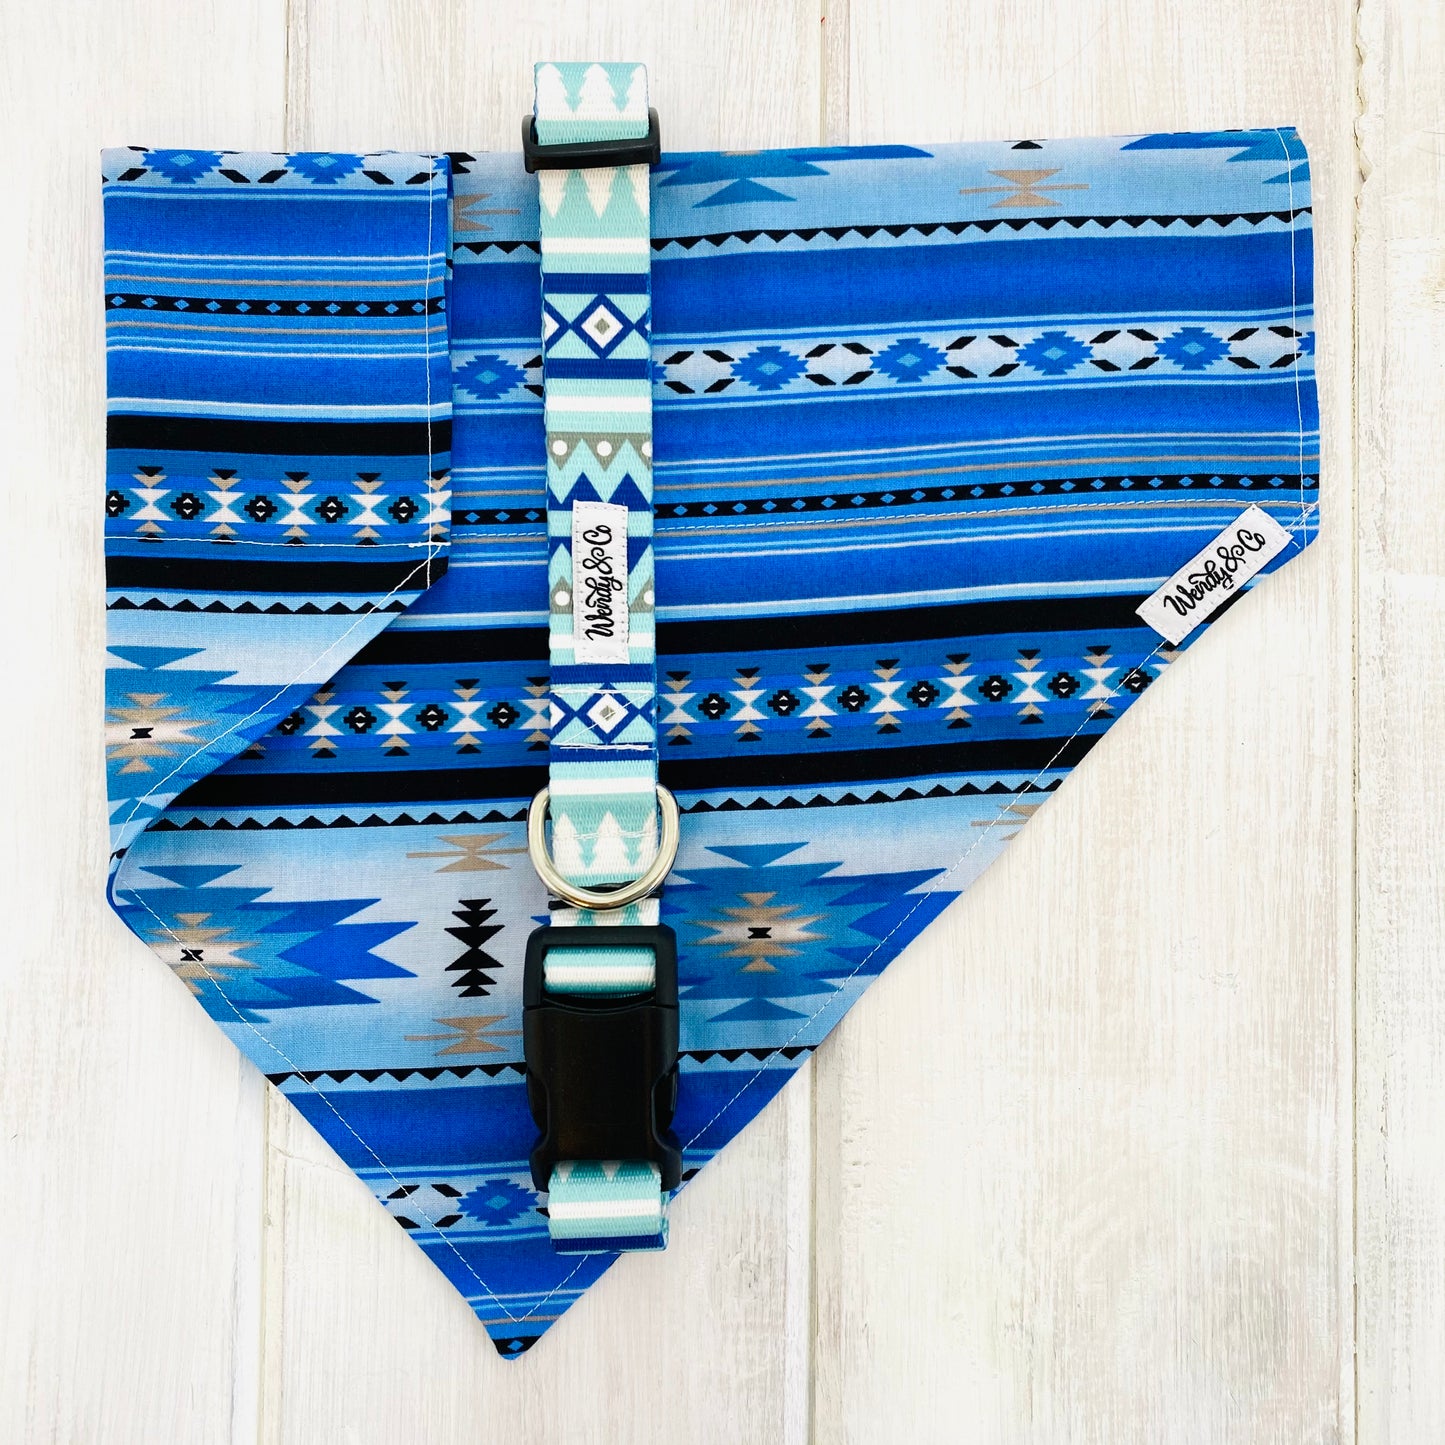 Dog bandana in blues and black with a native design.